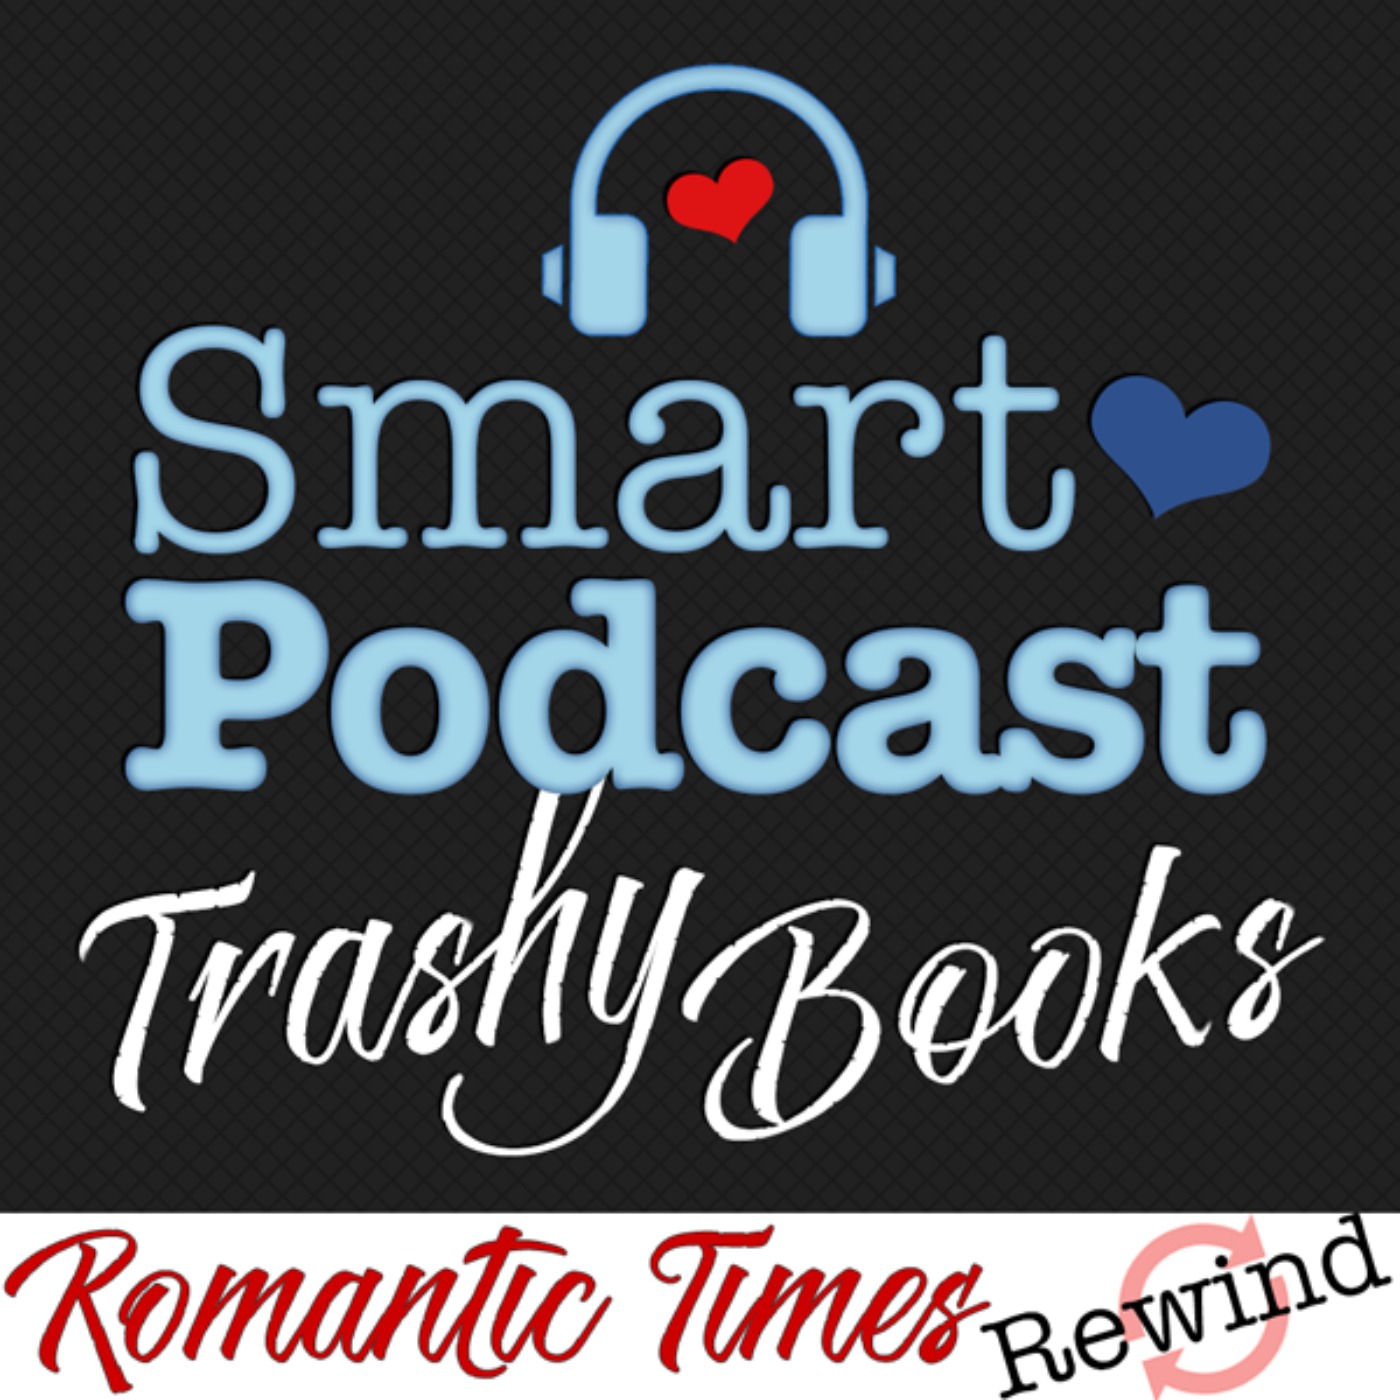 599. Romantic Times Rewind: December 2015 Ads and Features